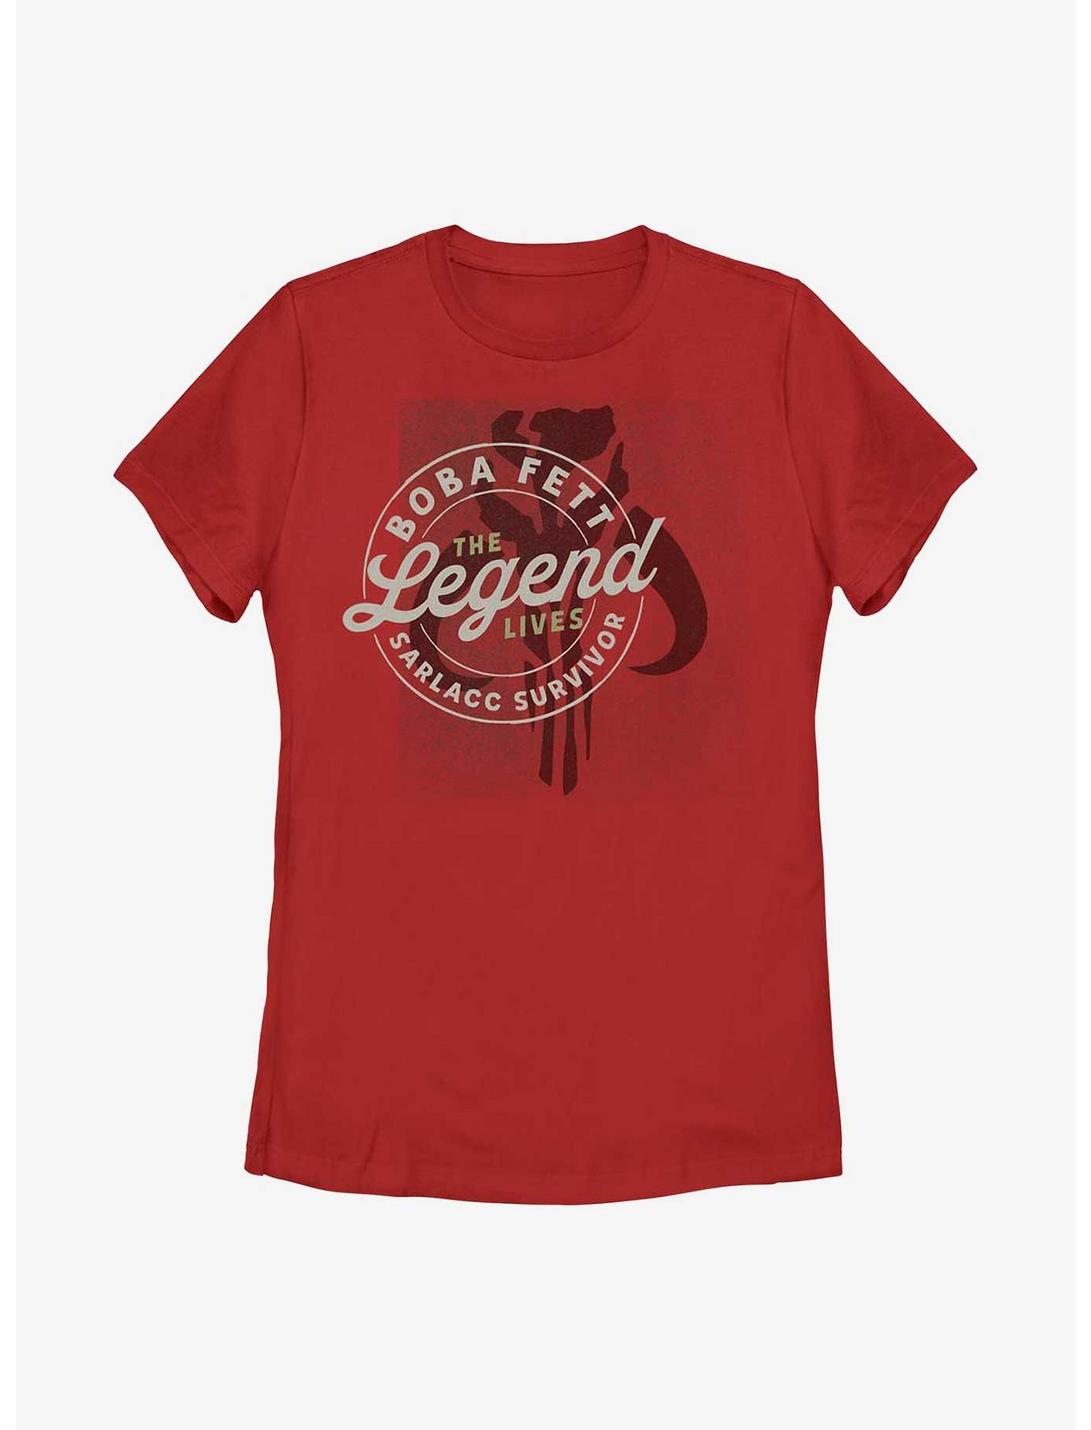 Star Wars: The Book Of Boba Fett The Legend Lives Womens T-Shirt, RED, hi-res